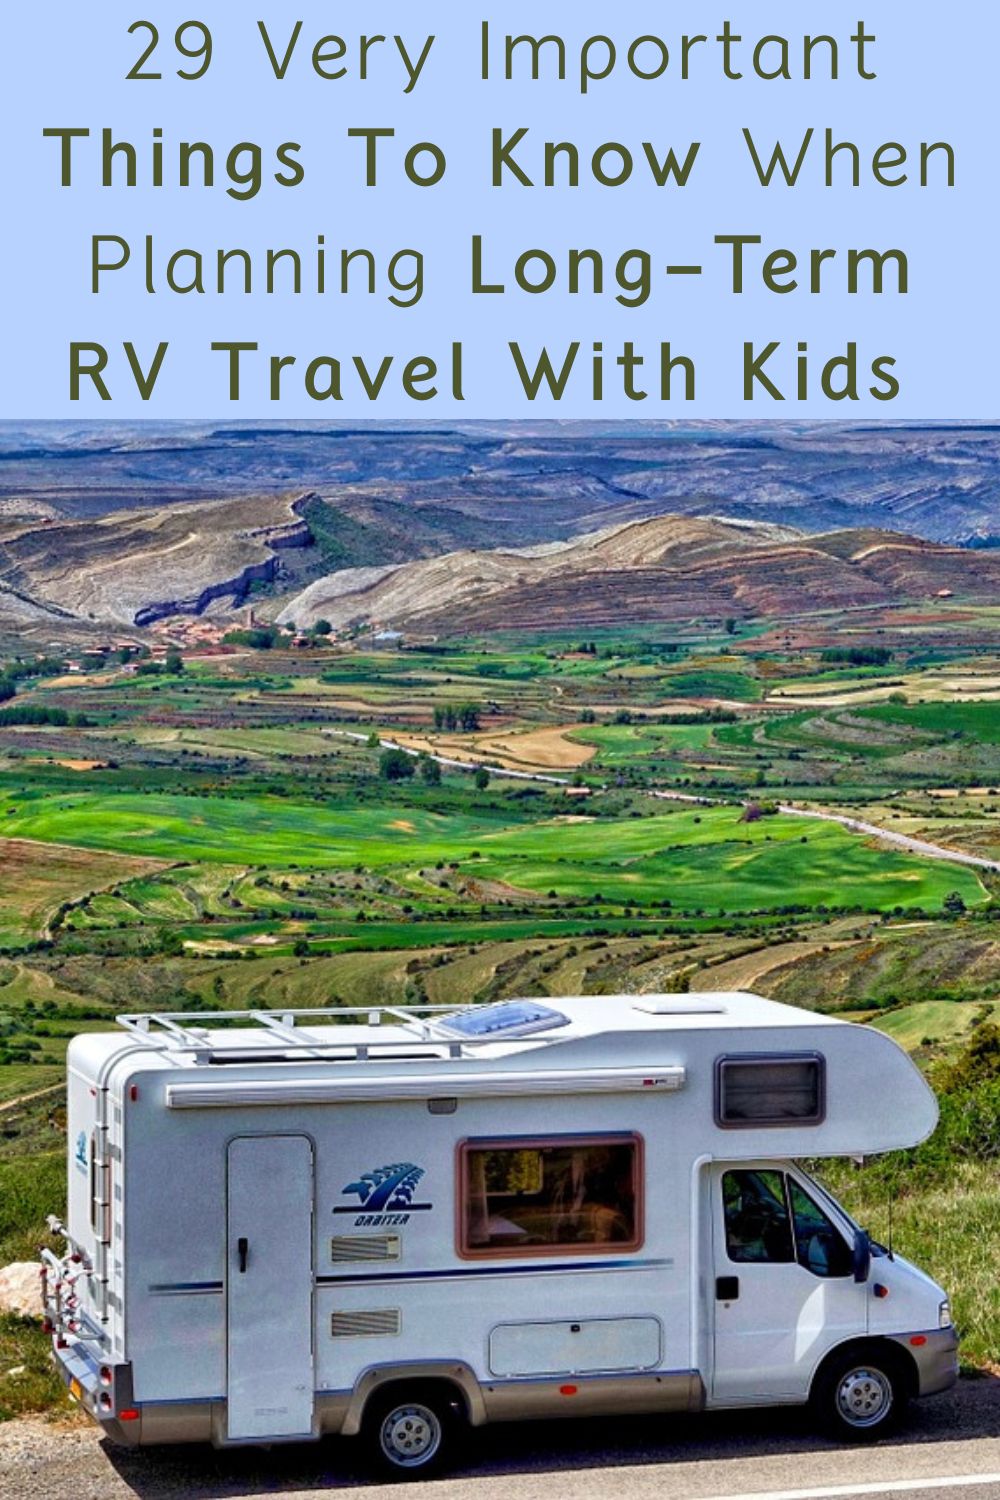 29 things to think about & do before trying full-time rv living and traveling with kids or teens, from a family who learned them by doing it.